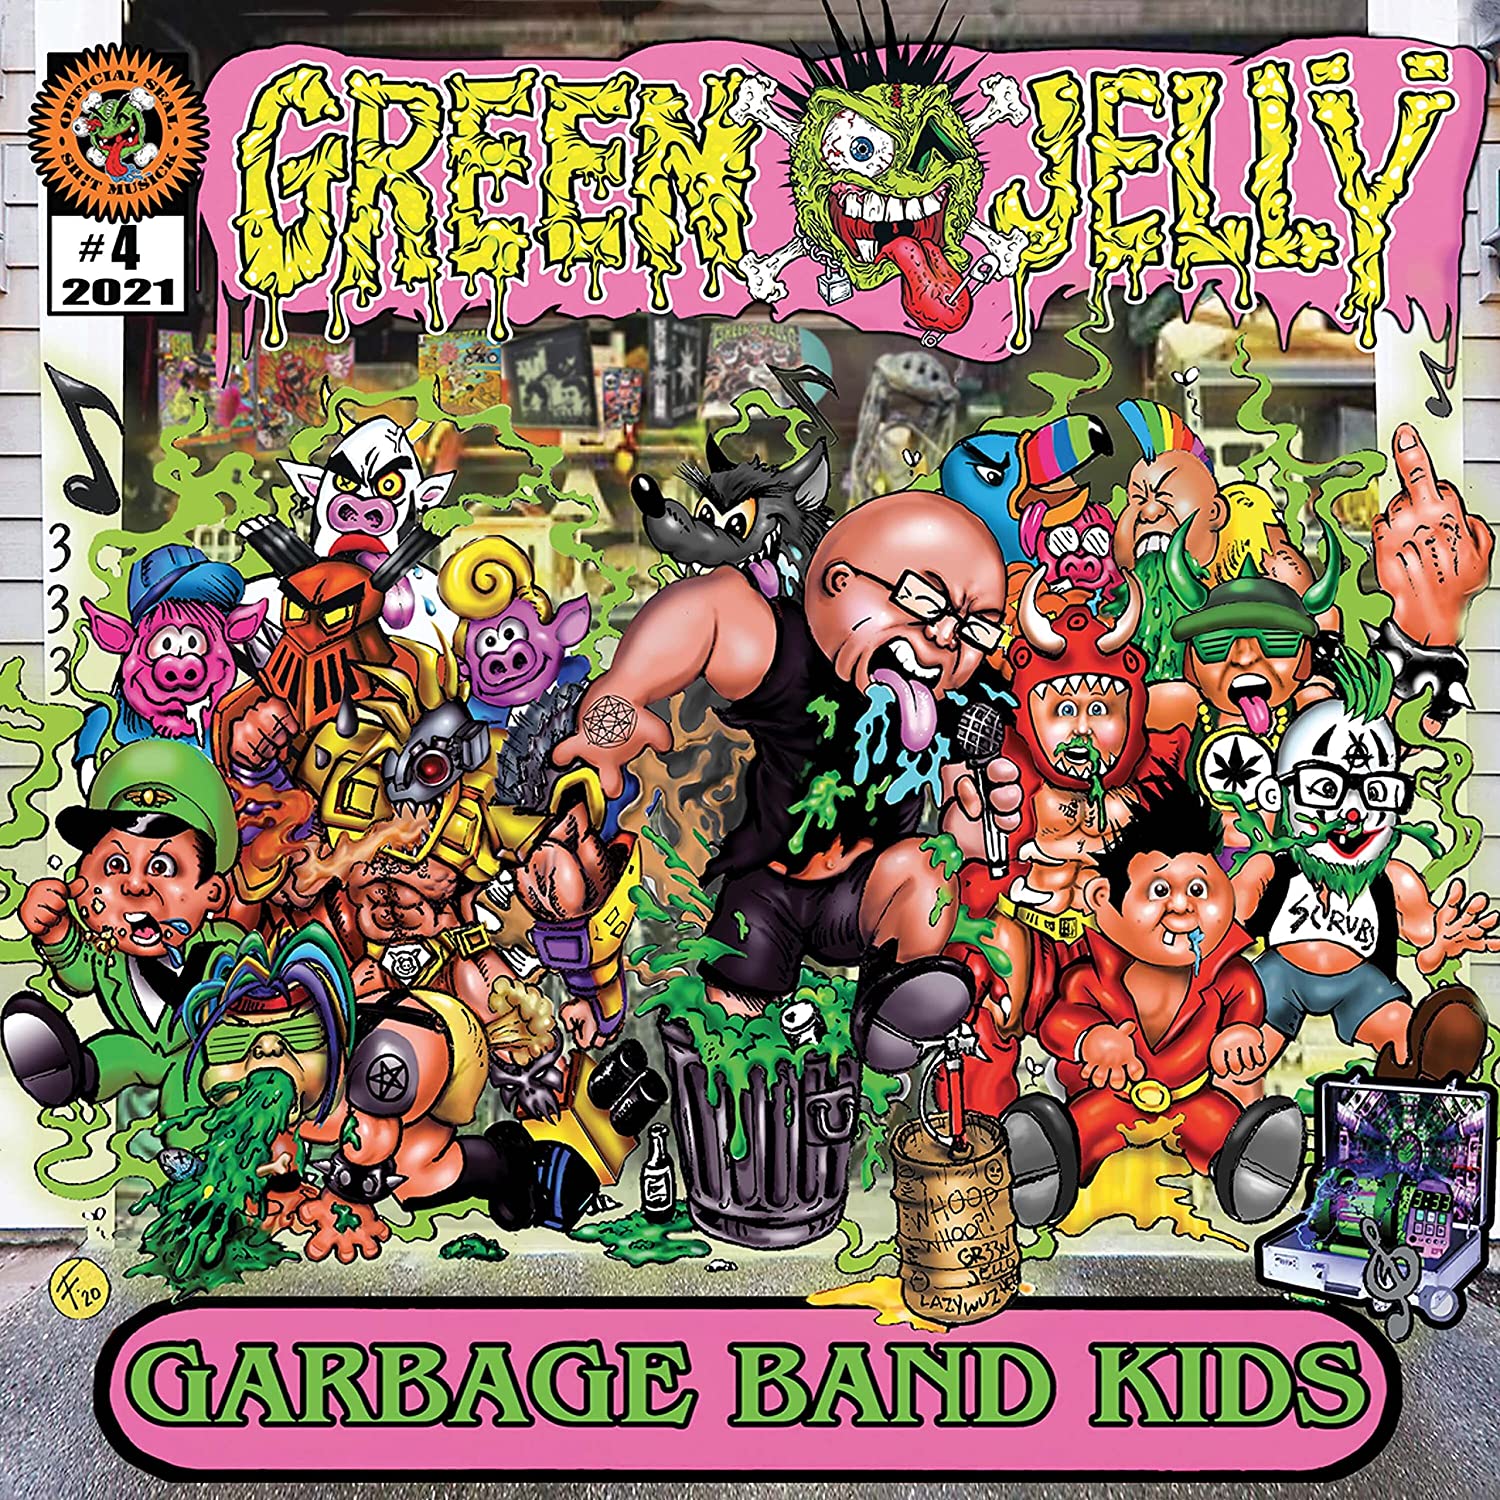 Green Jelly - Garbage Band Kids [Colored Vinyl]